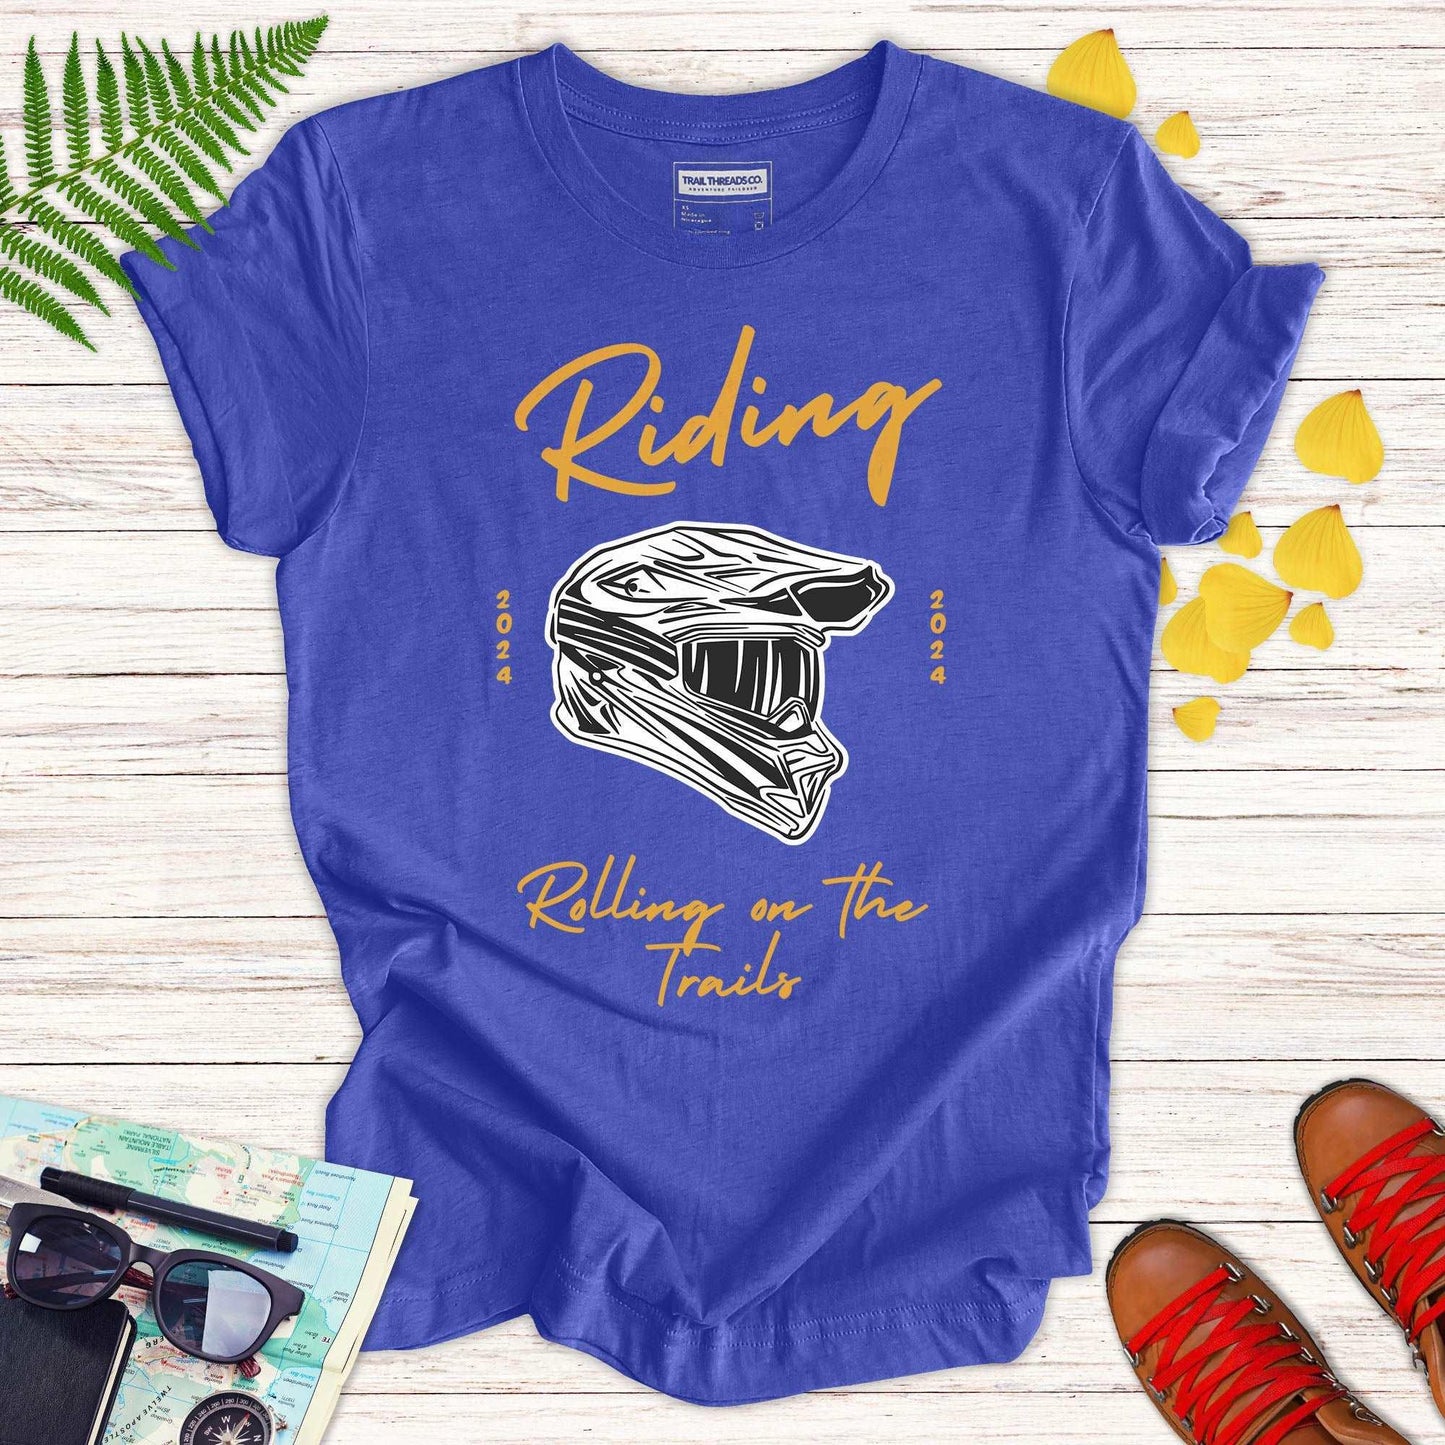 Riding - Rolling on the Trails T-shirt